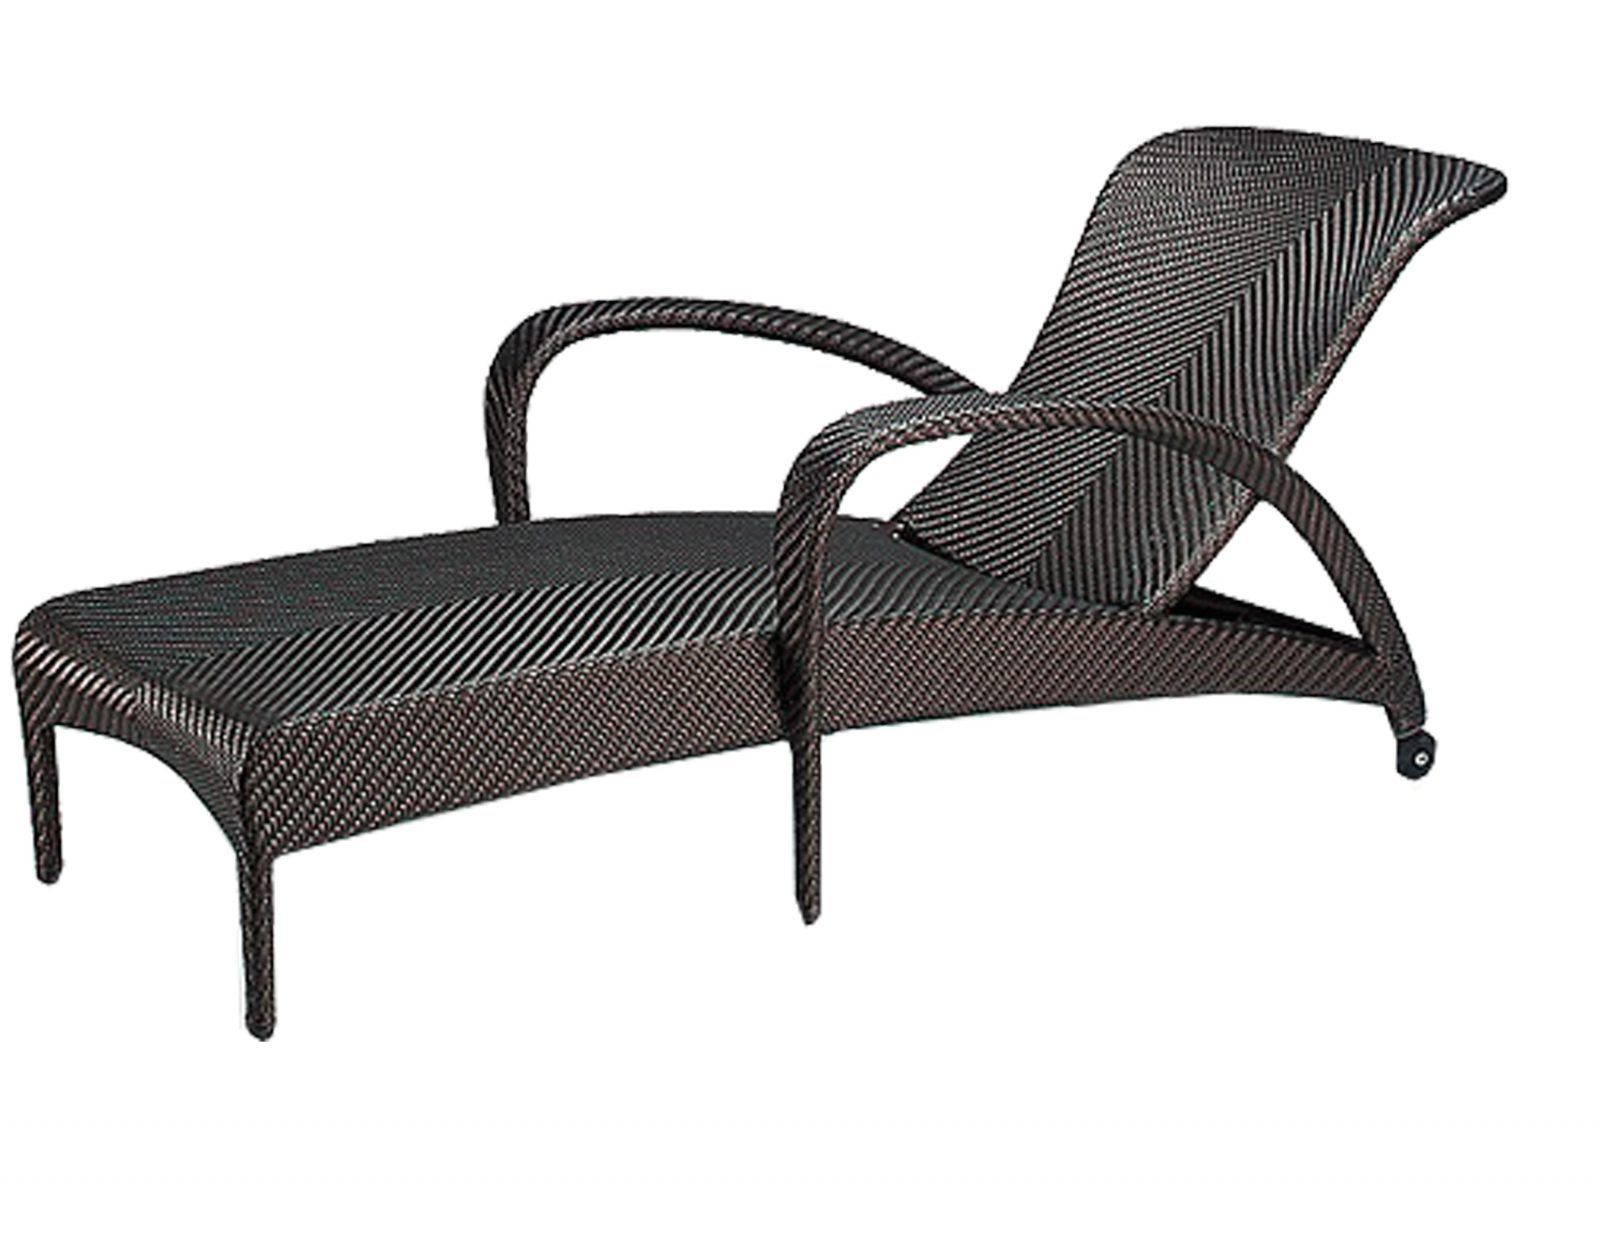 Preferred Outdoor Cart Wheel Adjustable Chaise Lounge Chairs Inside Buy Dedon Tango Adjustable Beach Chair With Wheels Online (View 17 of 25)